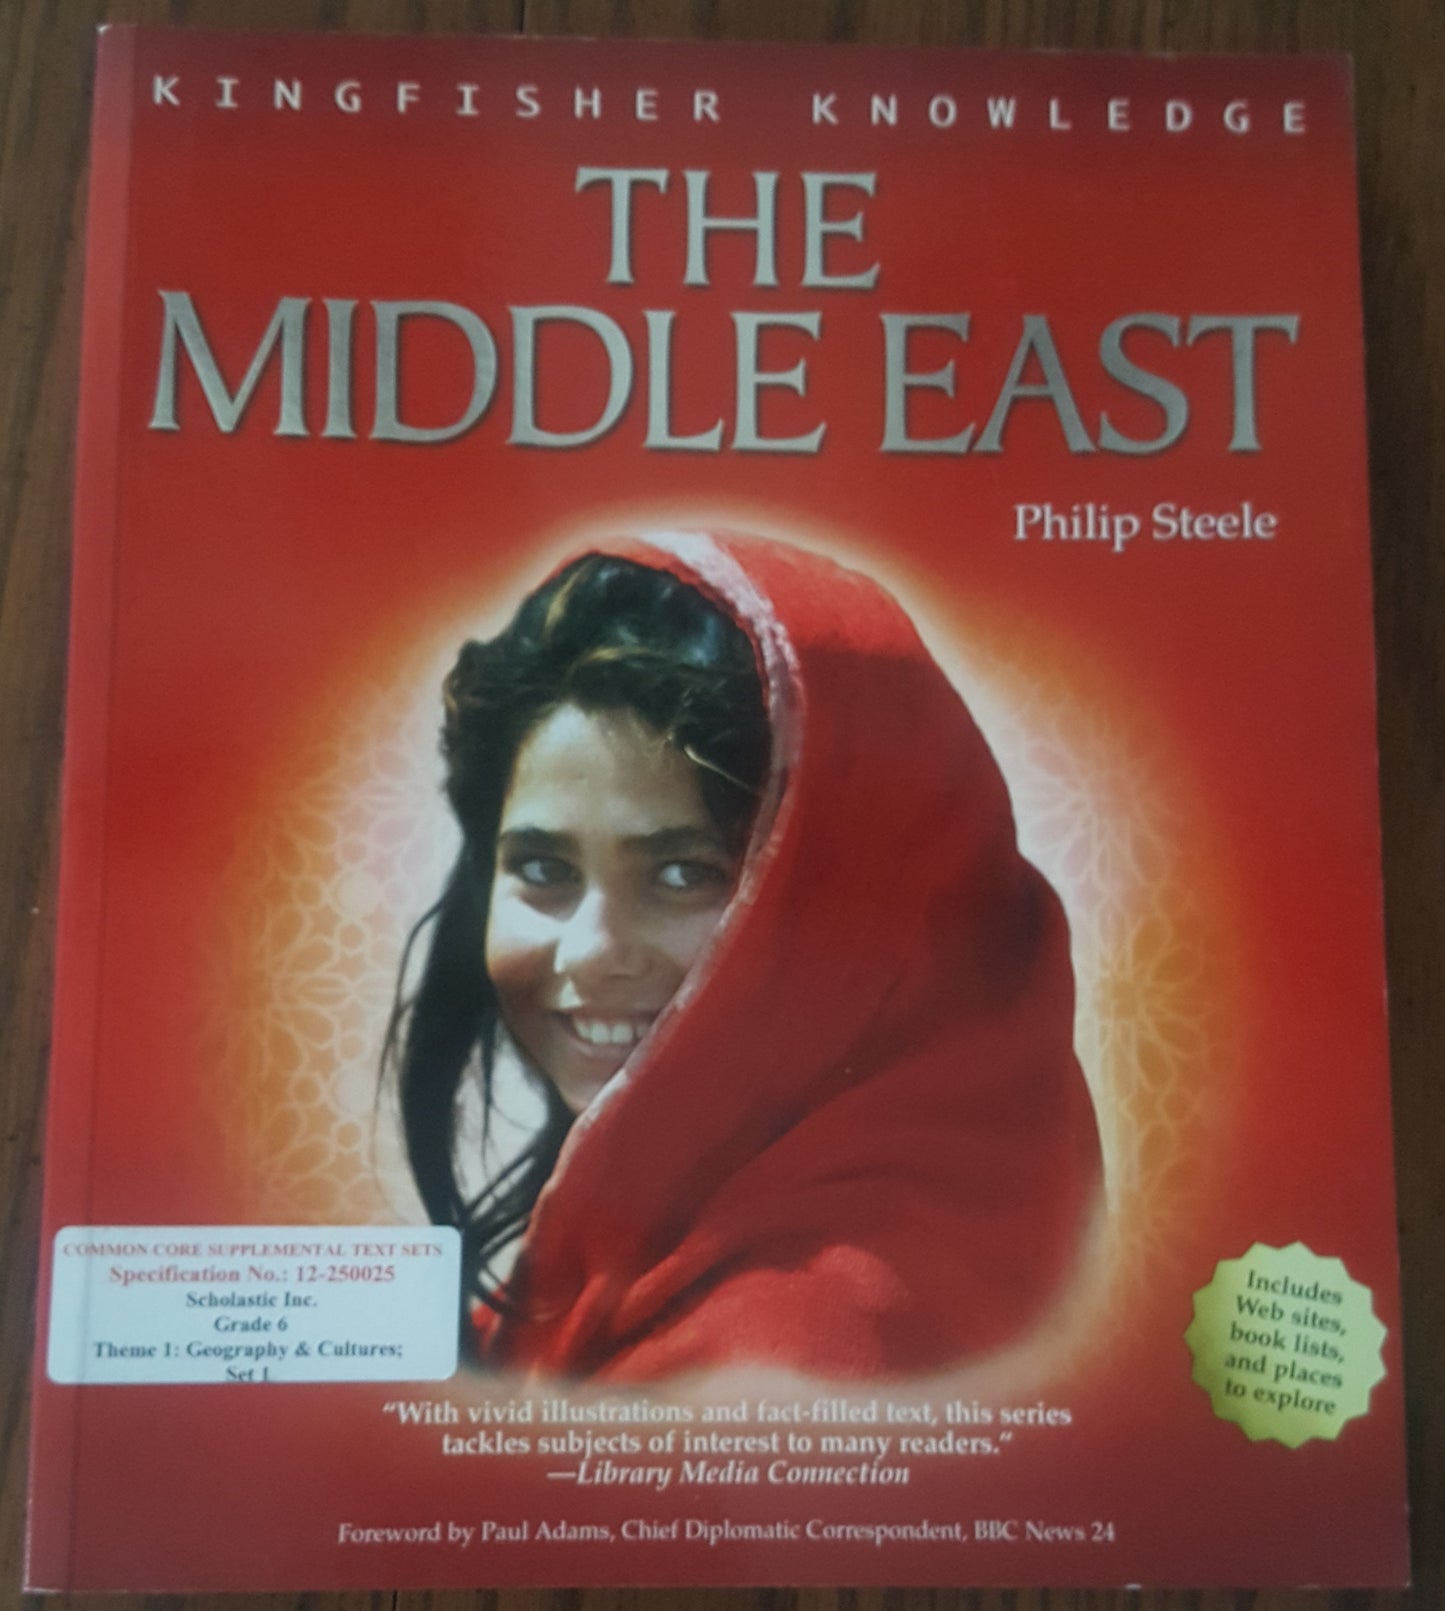 Kingfisher Knowledge The Middle East